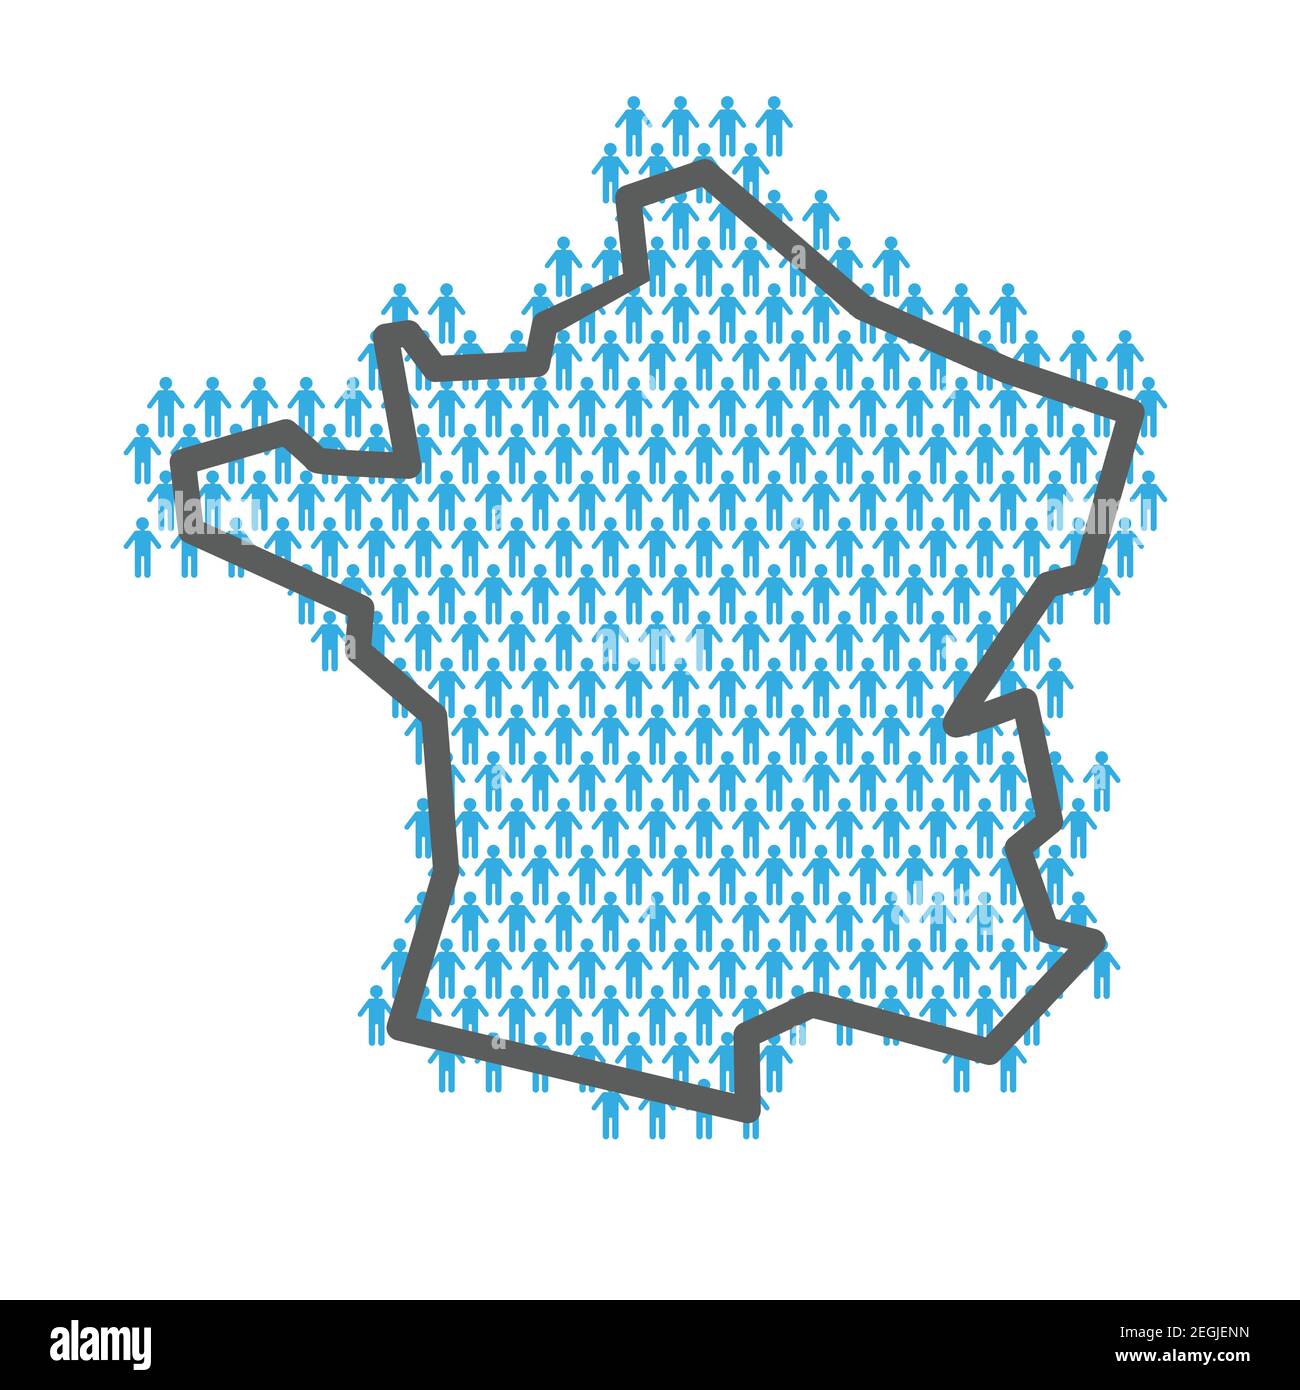 France population map. Country outline made from people figures Stock ...